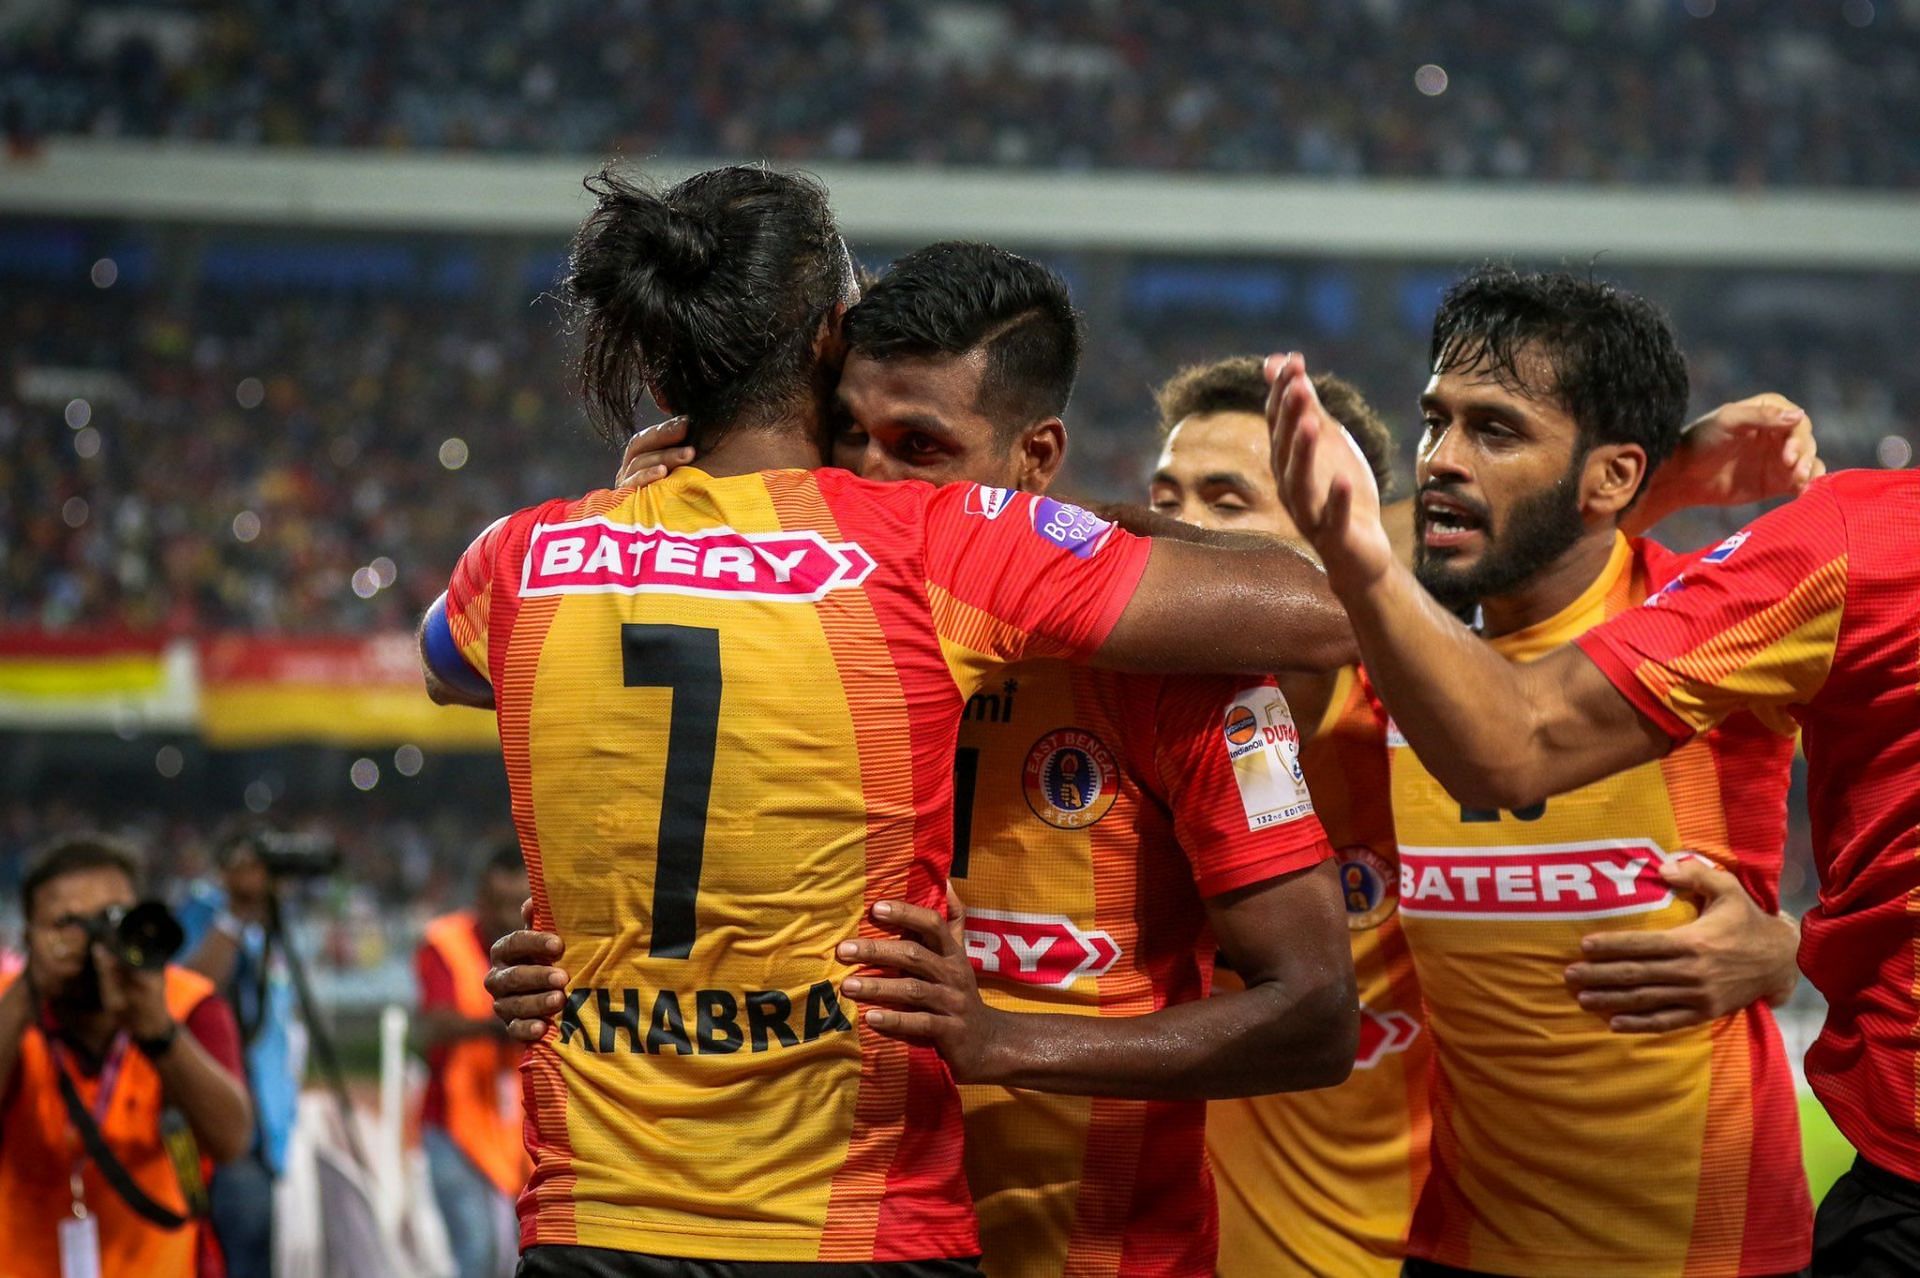 Nandhakumar Sekar scored in the 60th minute of the match to give East Bengal FC the lead.